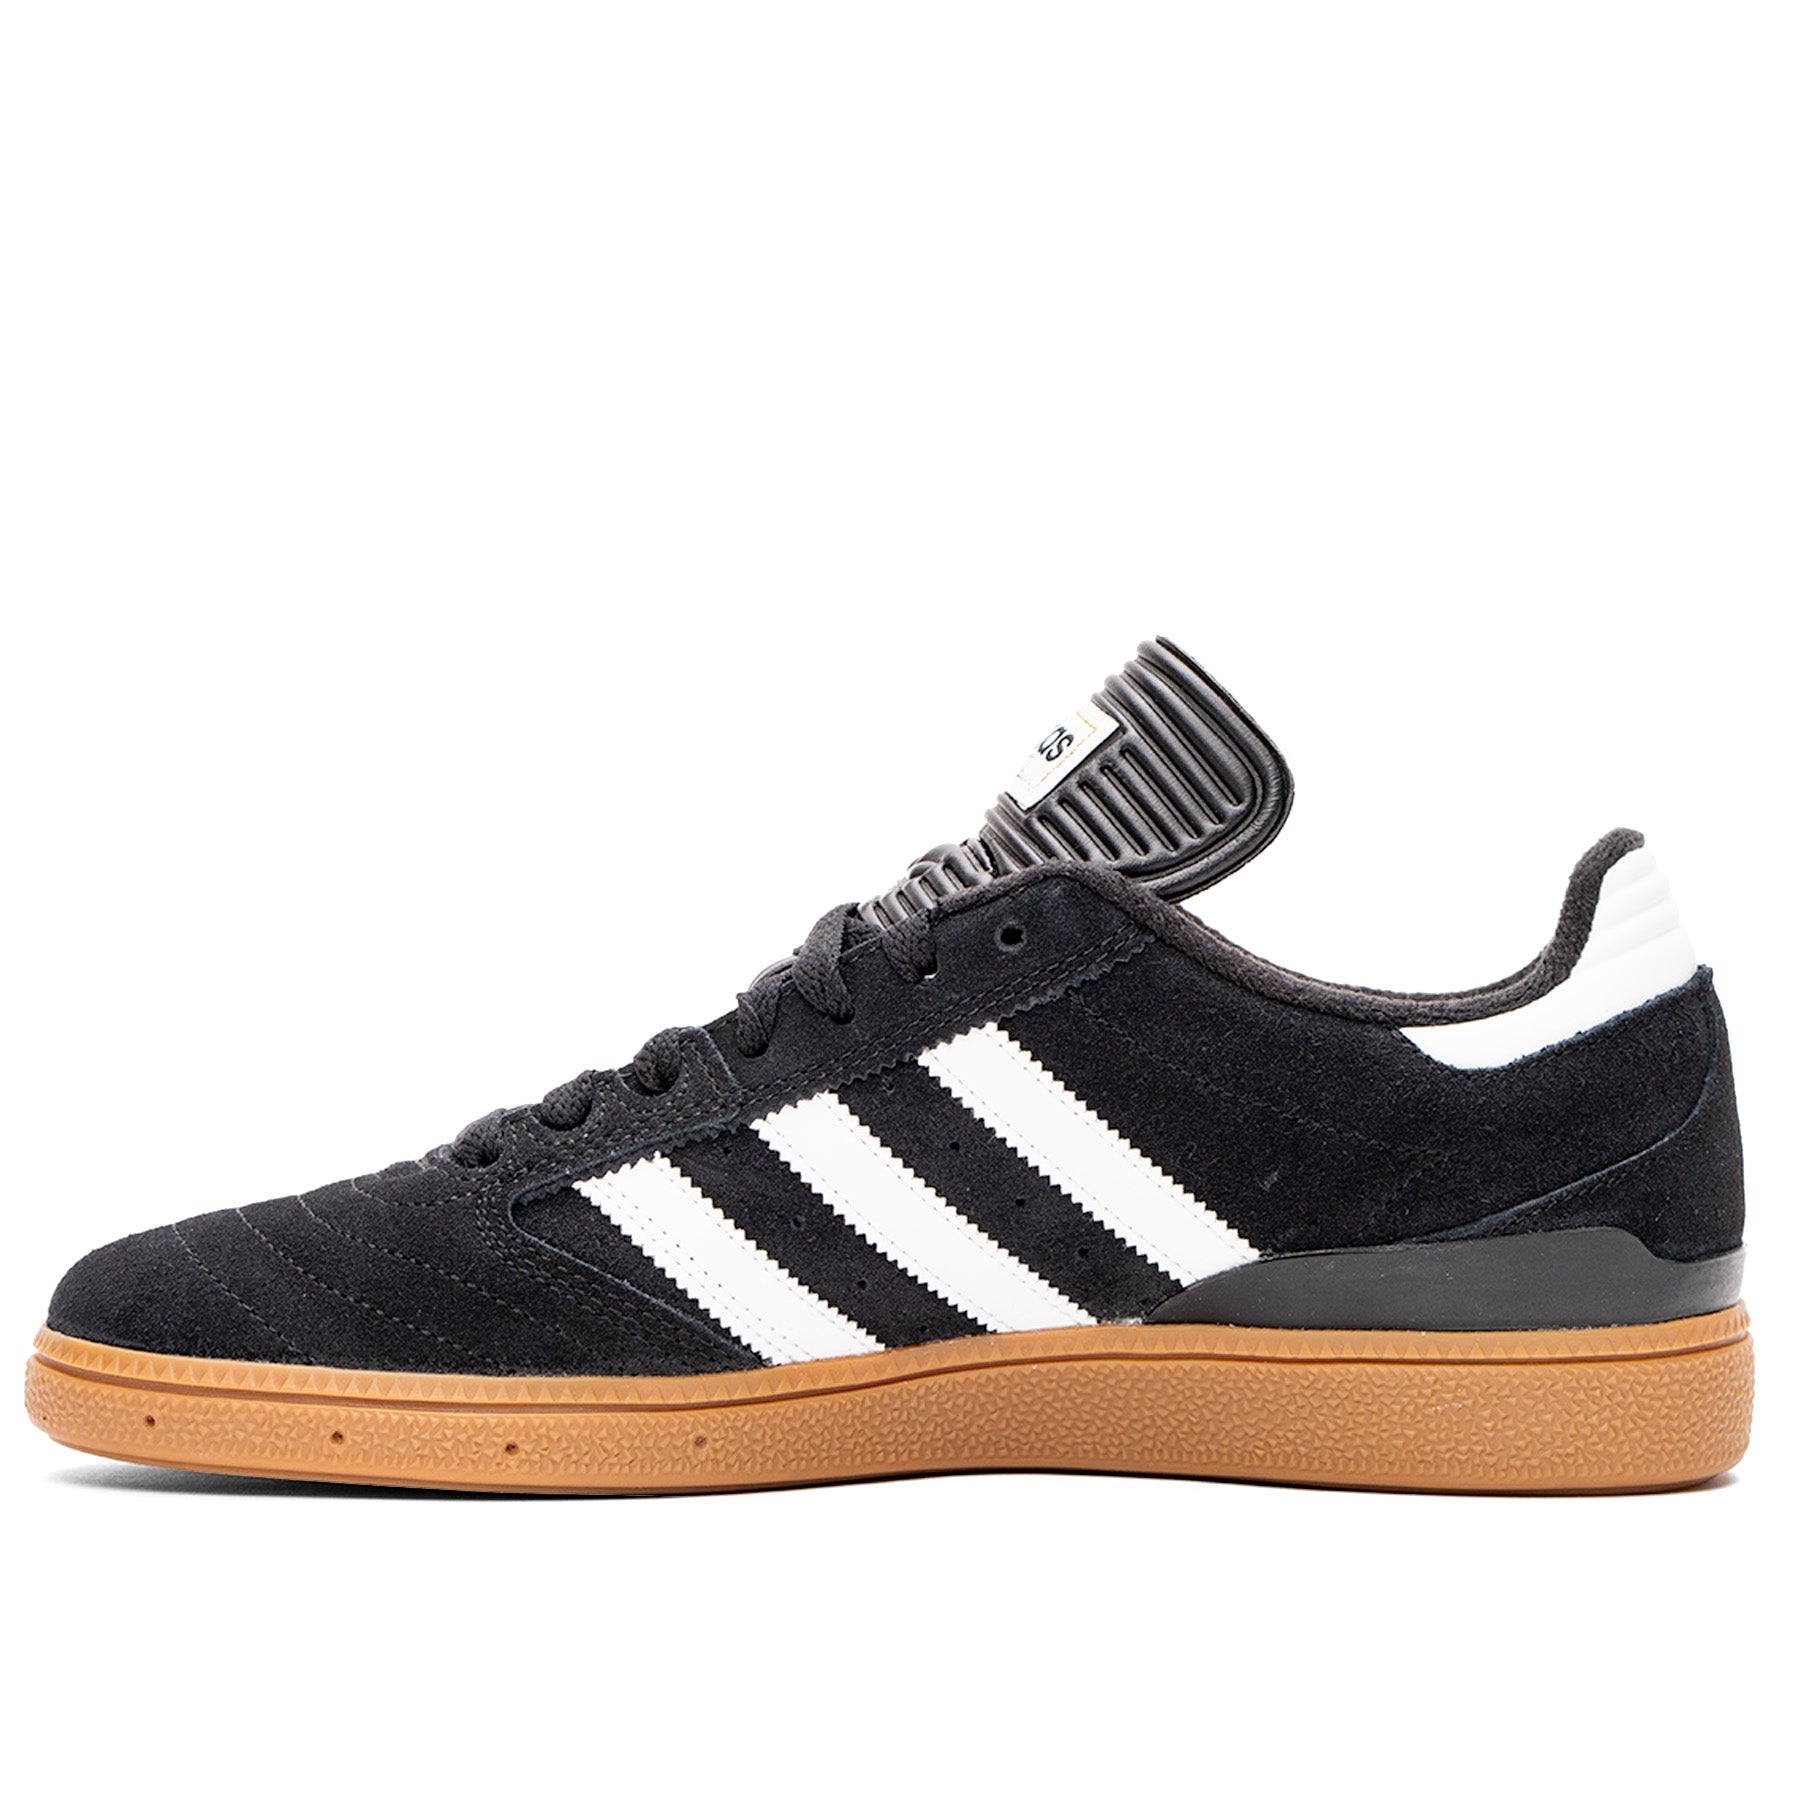 Adidas - Busenitz - Black suede shoe with white stripes and brown gum sole